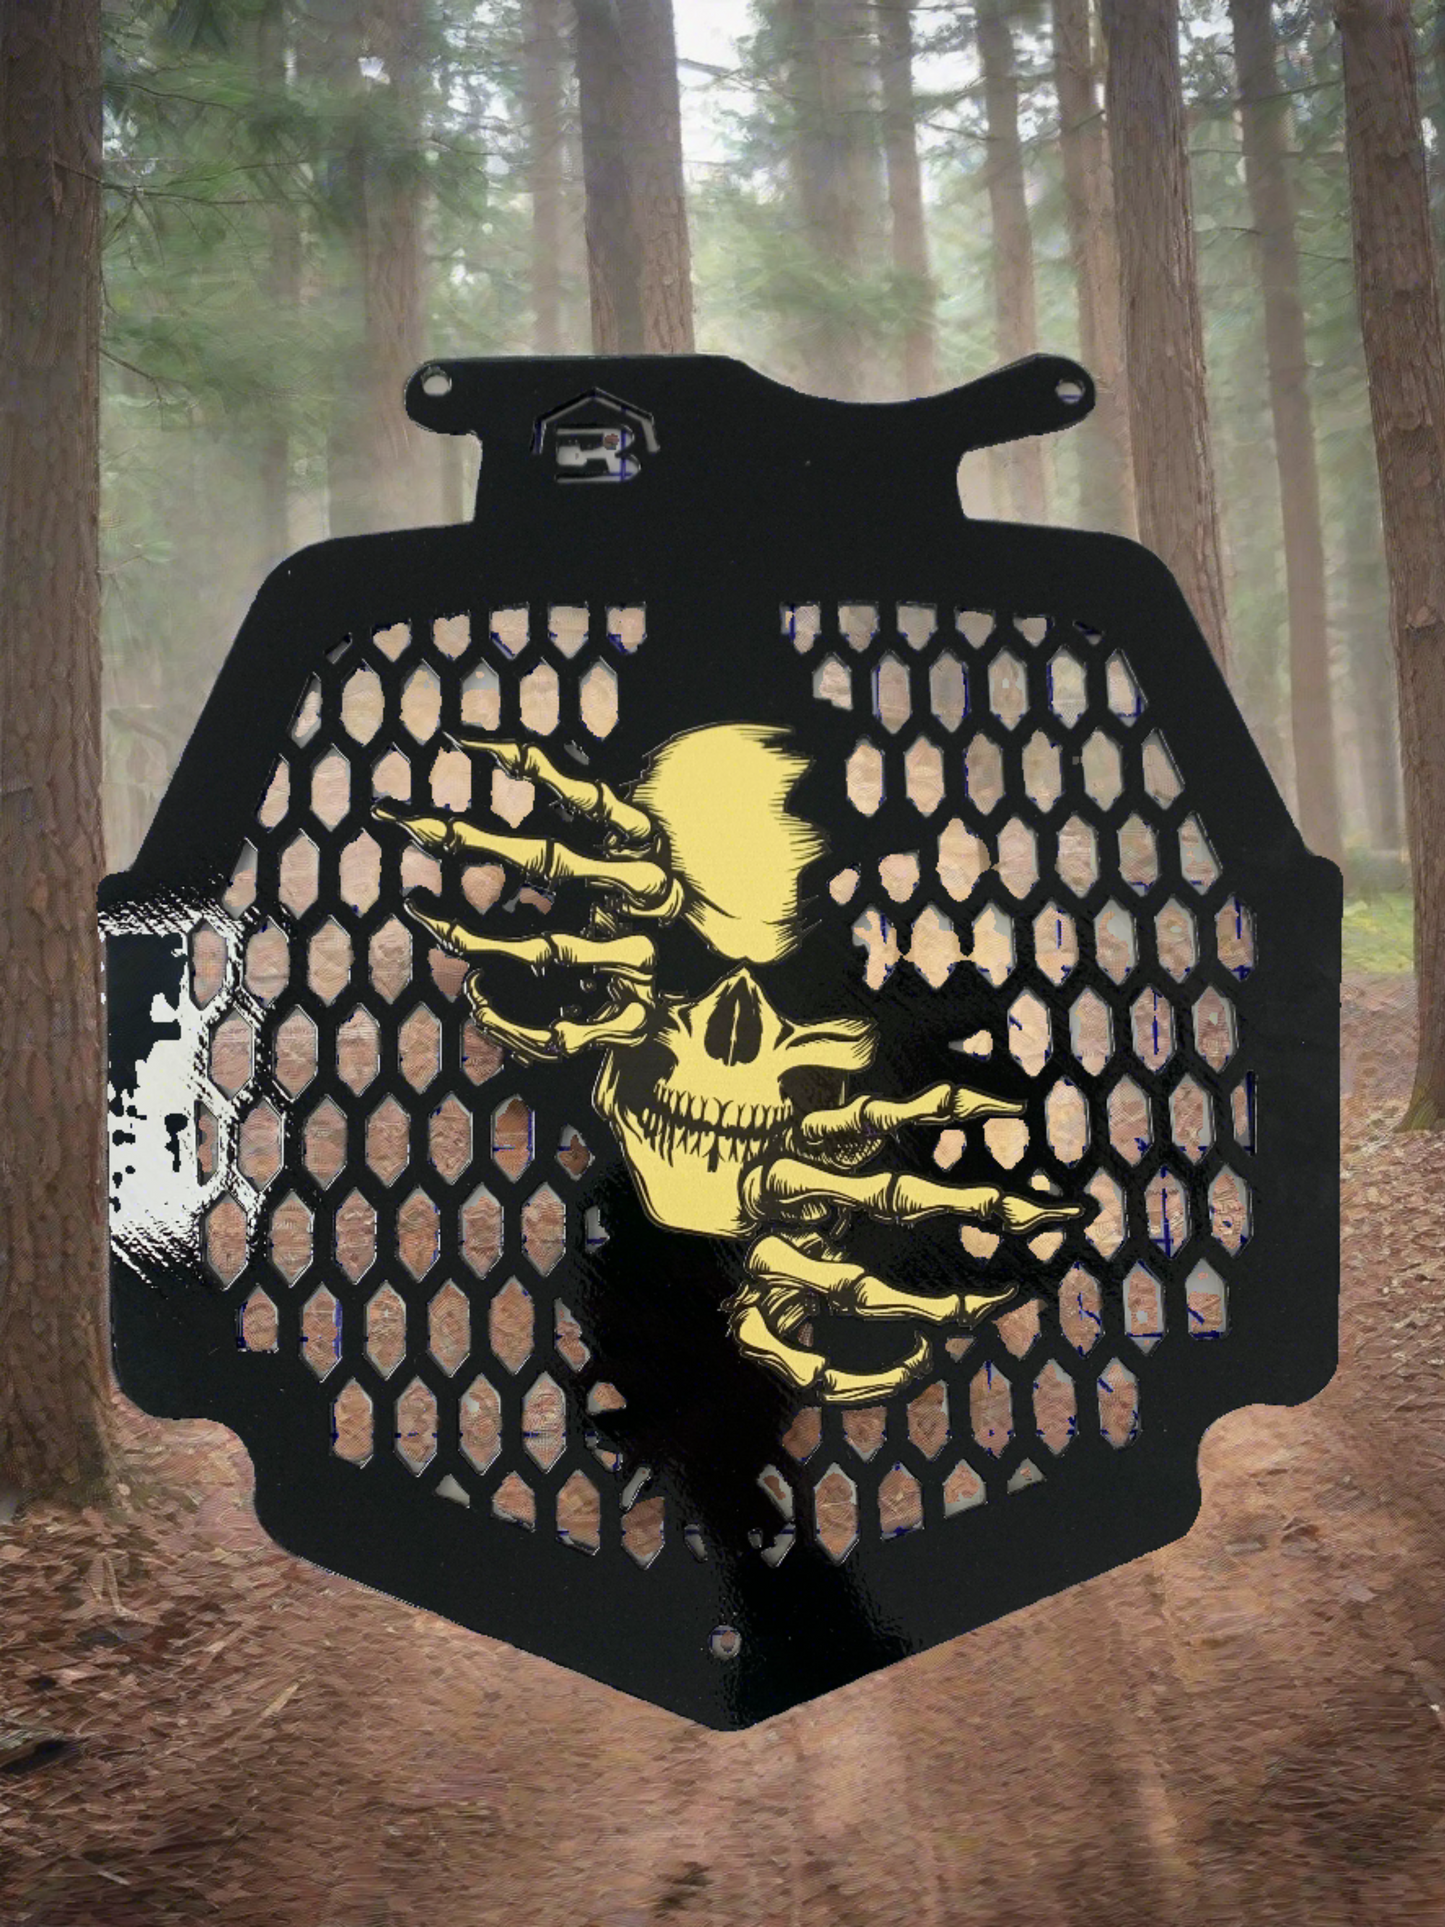 Ripping Skull Radiator cover fits Can Am Outlander Max XMR 450 570 650 850 1000 - Your Color Choices